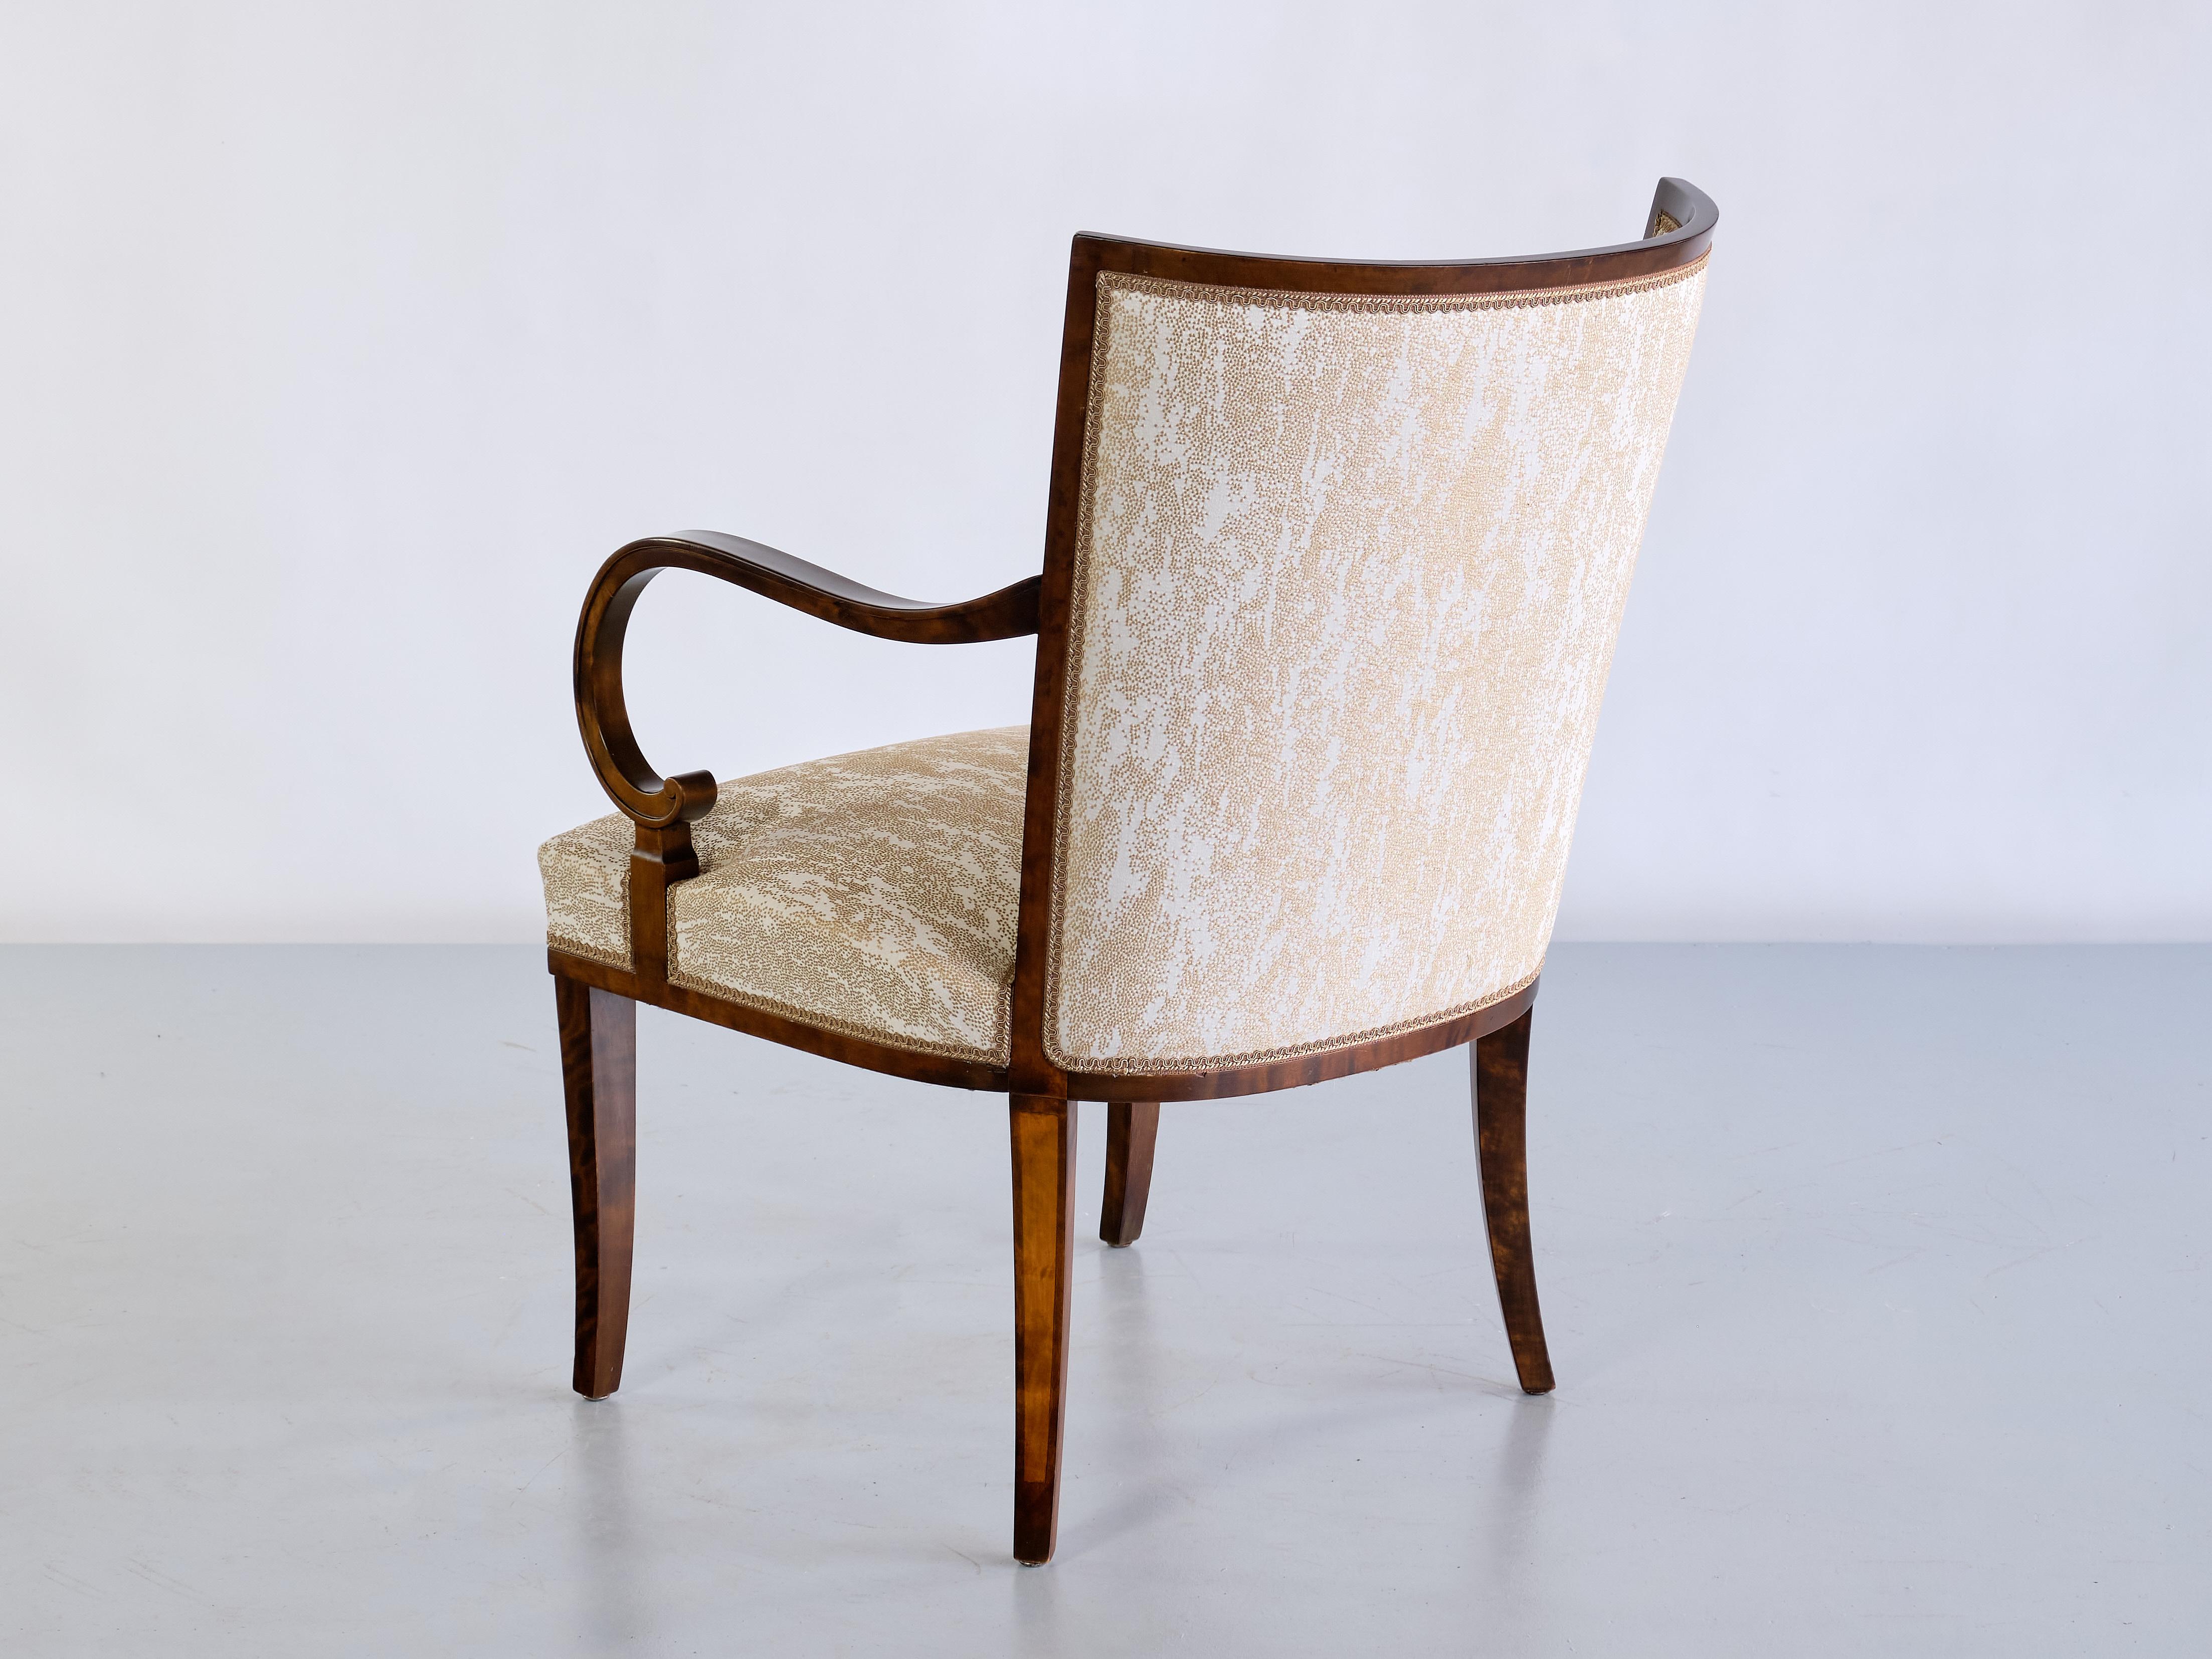 Pair of Carl Malmsten Armchairs in Birch and Satinwood, Bodafors, Sweden, 1930s For Sale 5